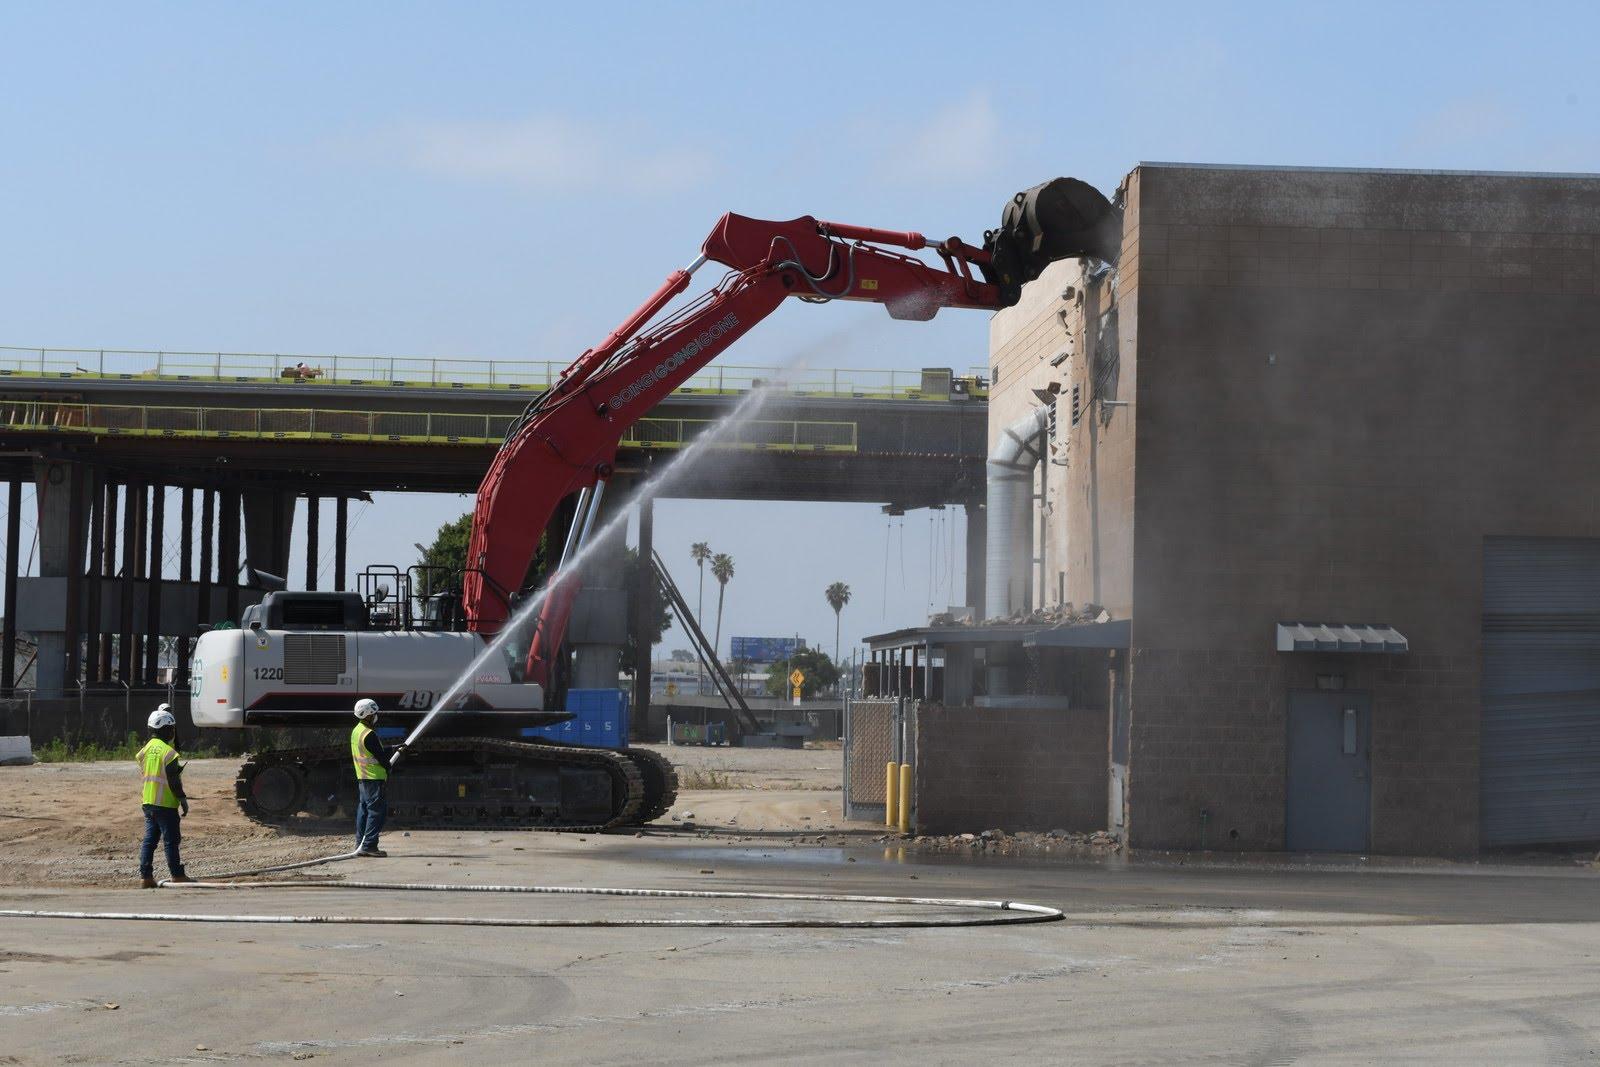 Demolition of old building on the site. In the background is the LAX Automated People Mover, which is currently under construction.